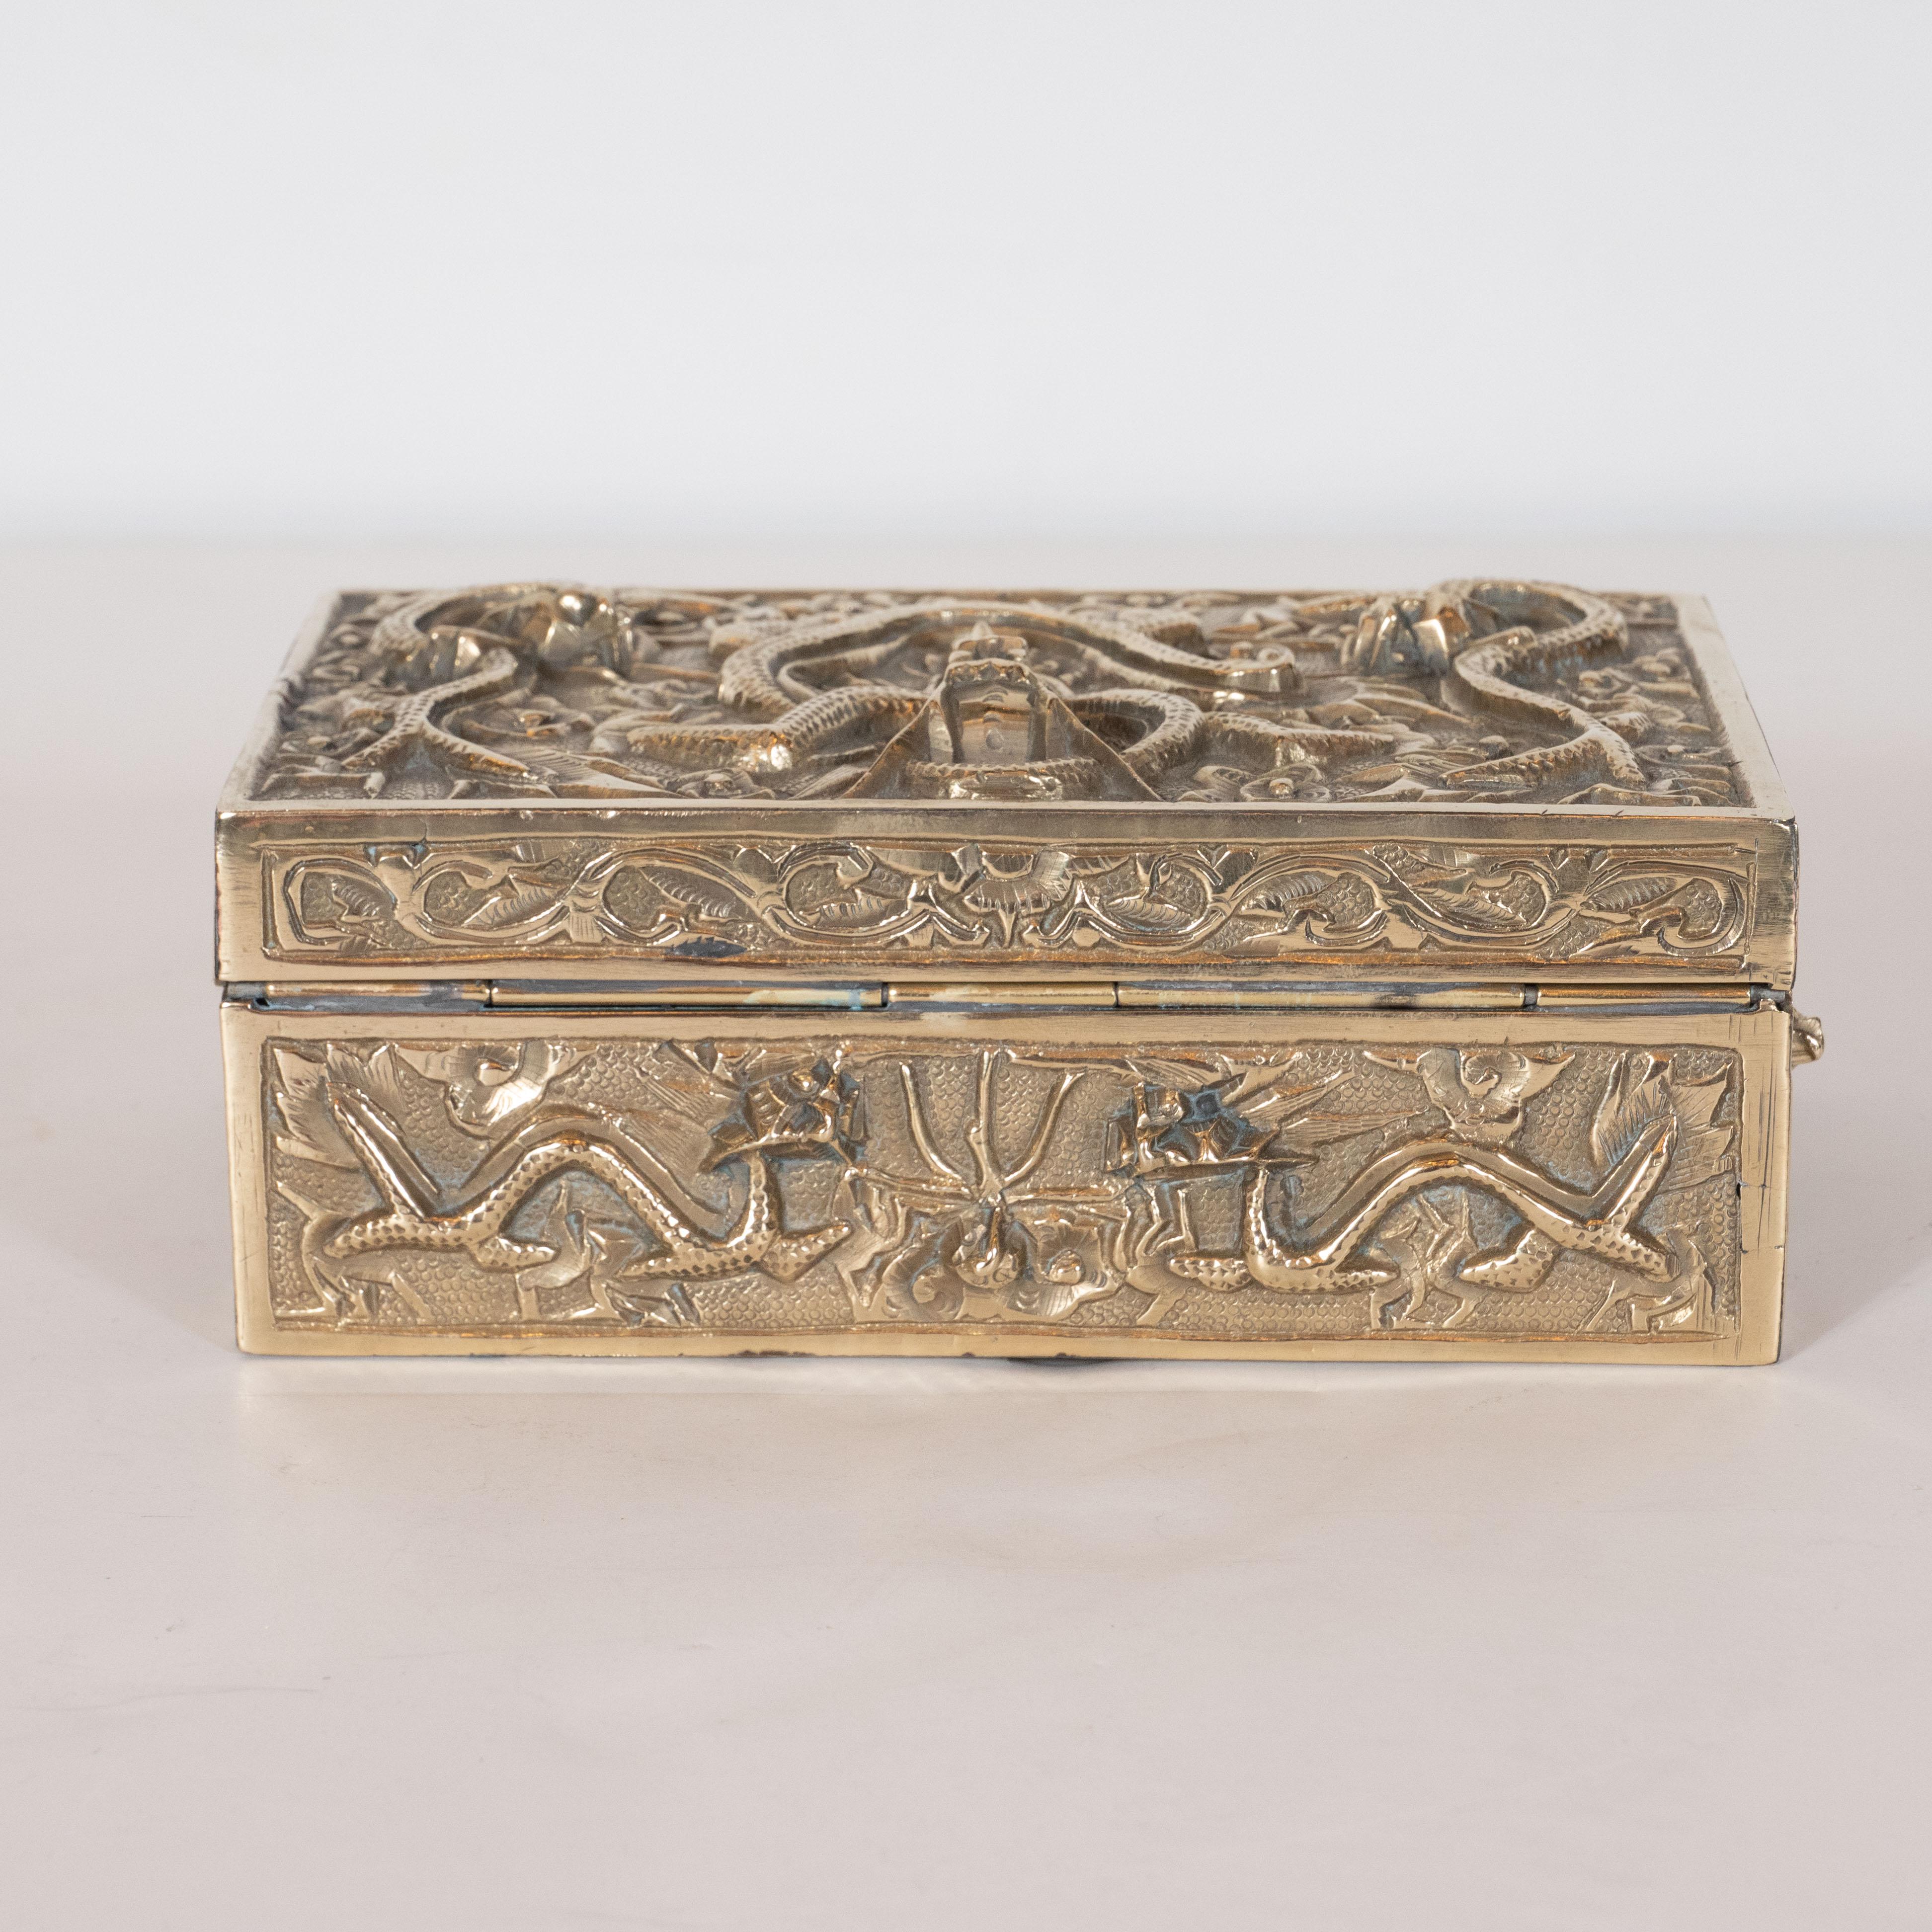 Art Deco Brass Rectangular Decorative Box with Dragon Motif in High Relief 1